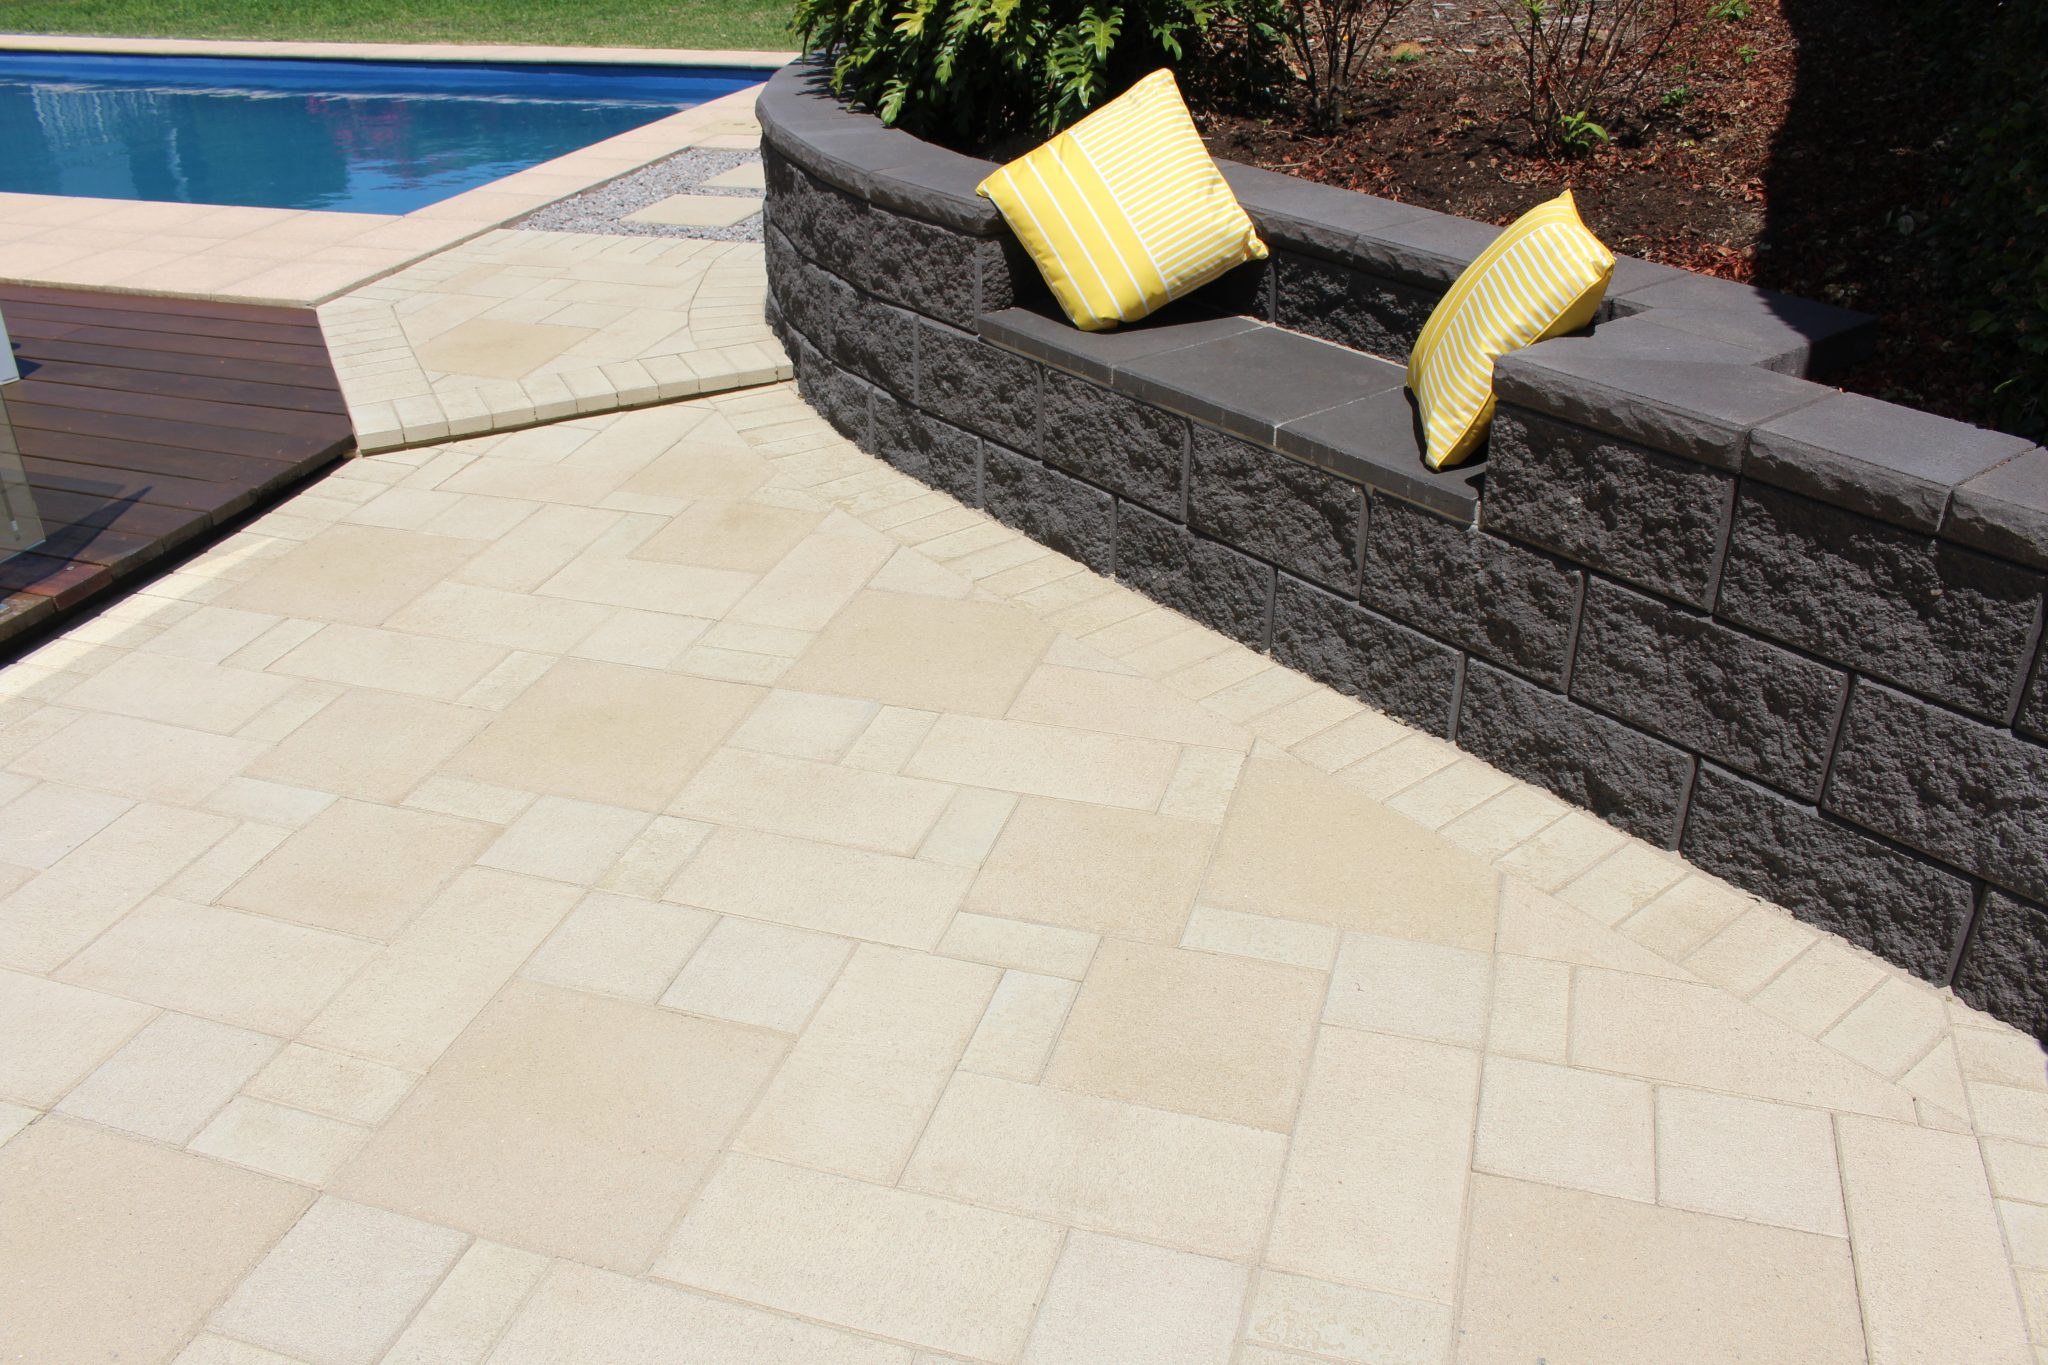 French_pattern_paved_pool_area_reason_to_use_pavers_instead_of_a_slab